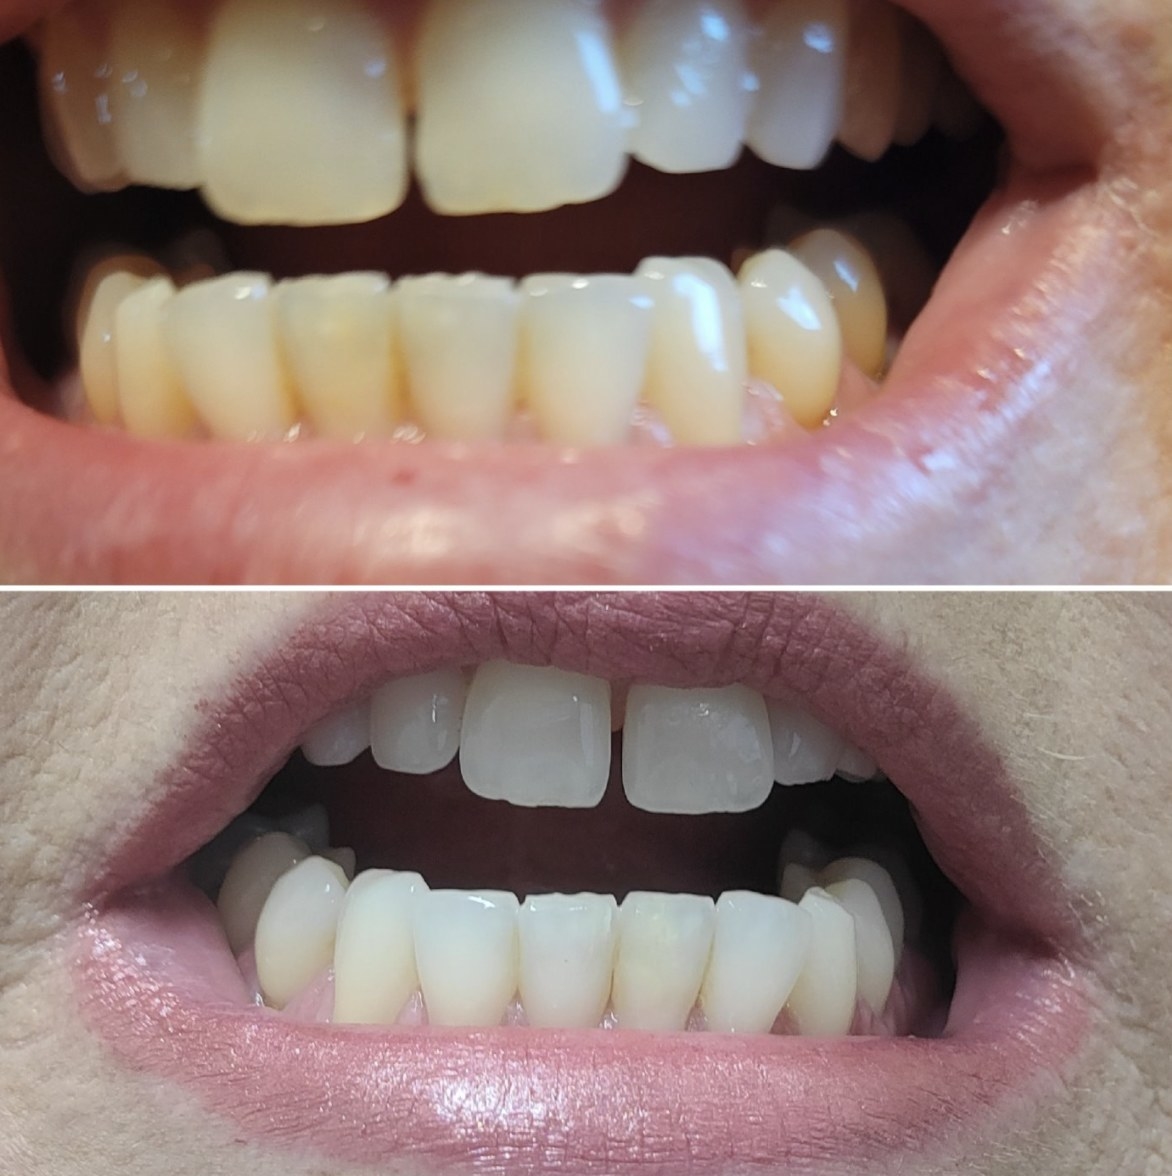 reviewer photo showing their smile before and after using the whitening pen, with visible results